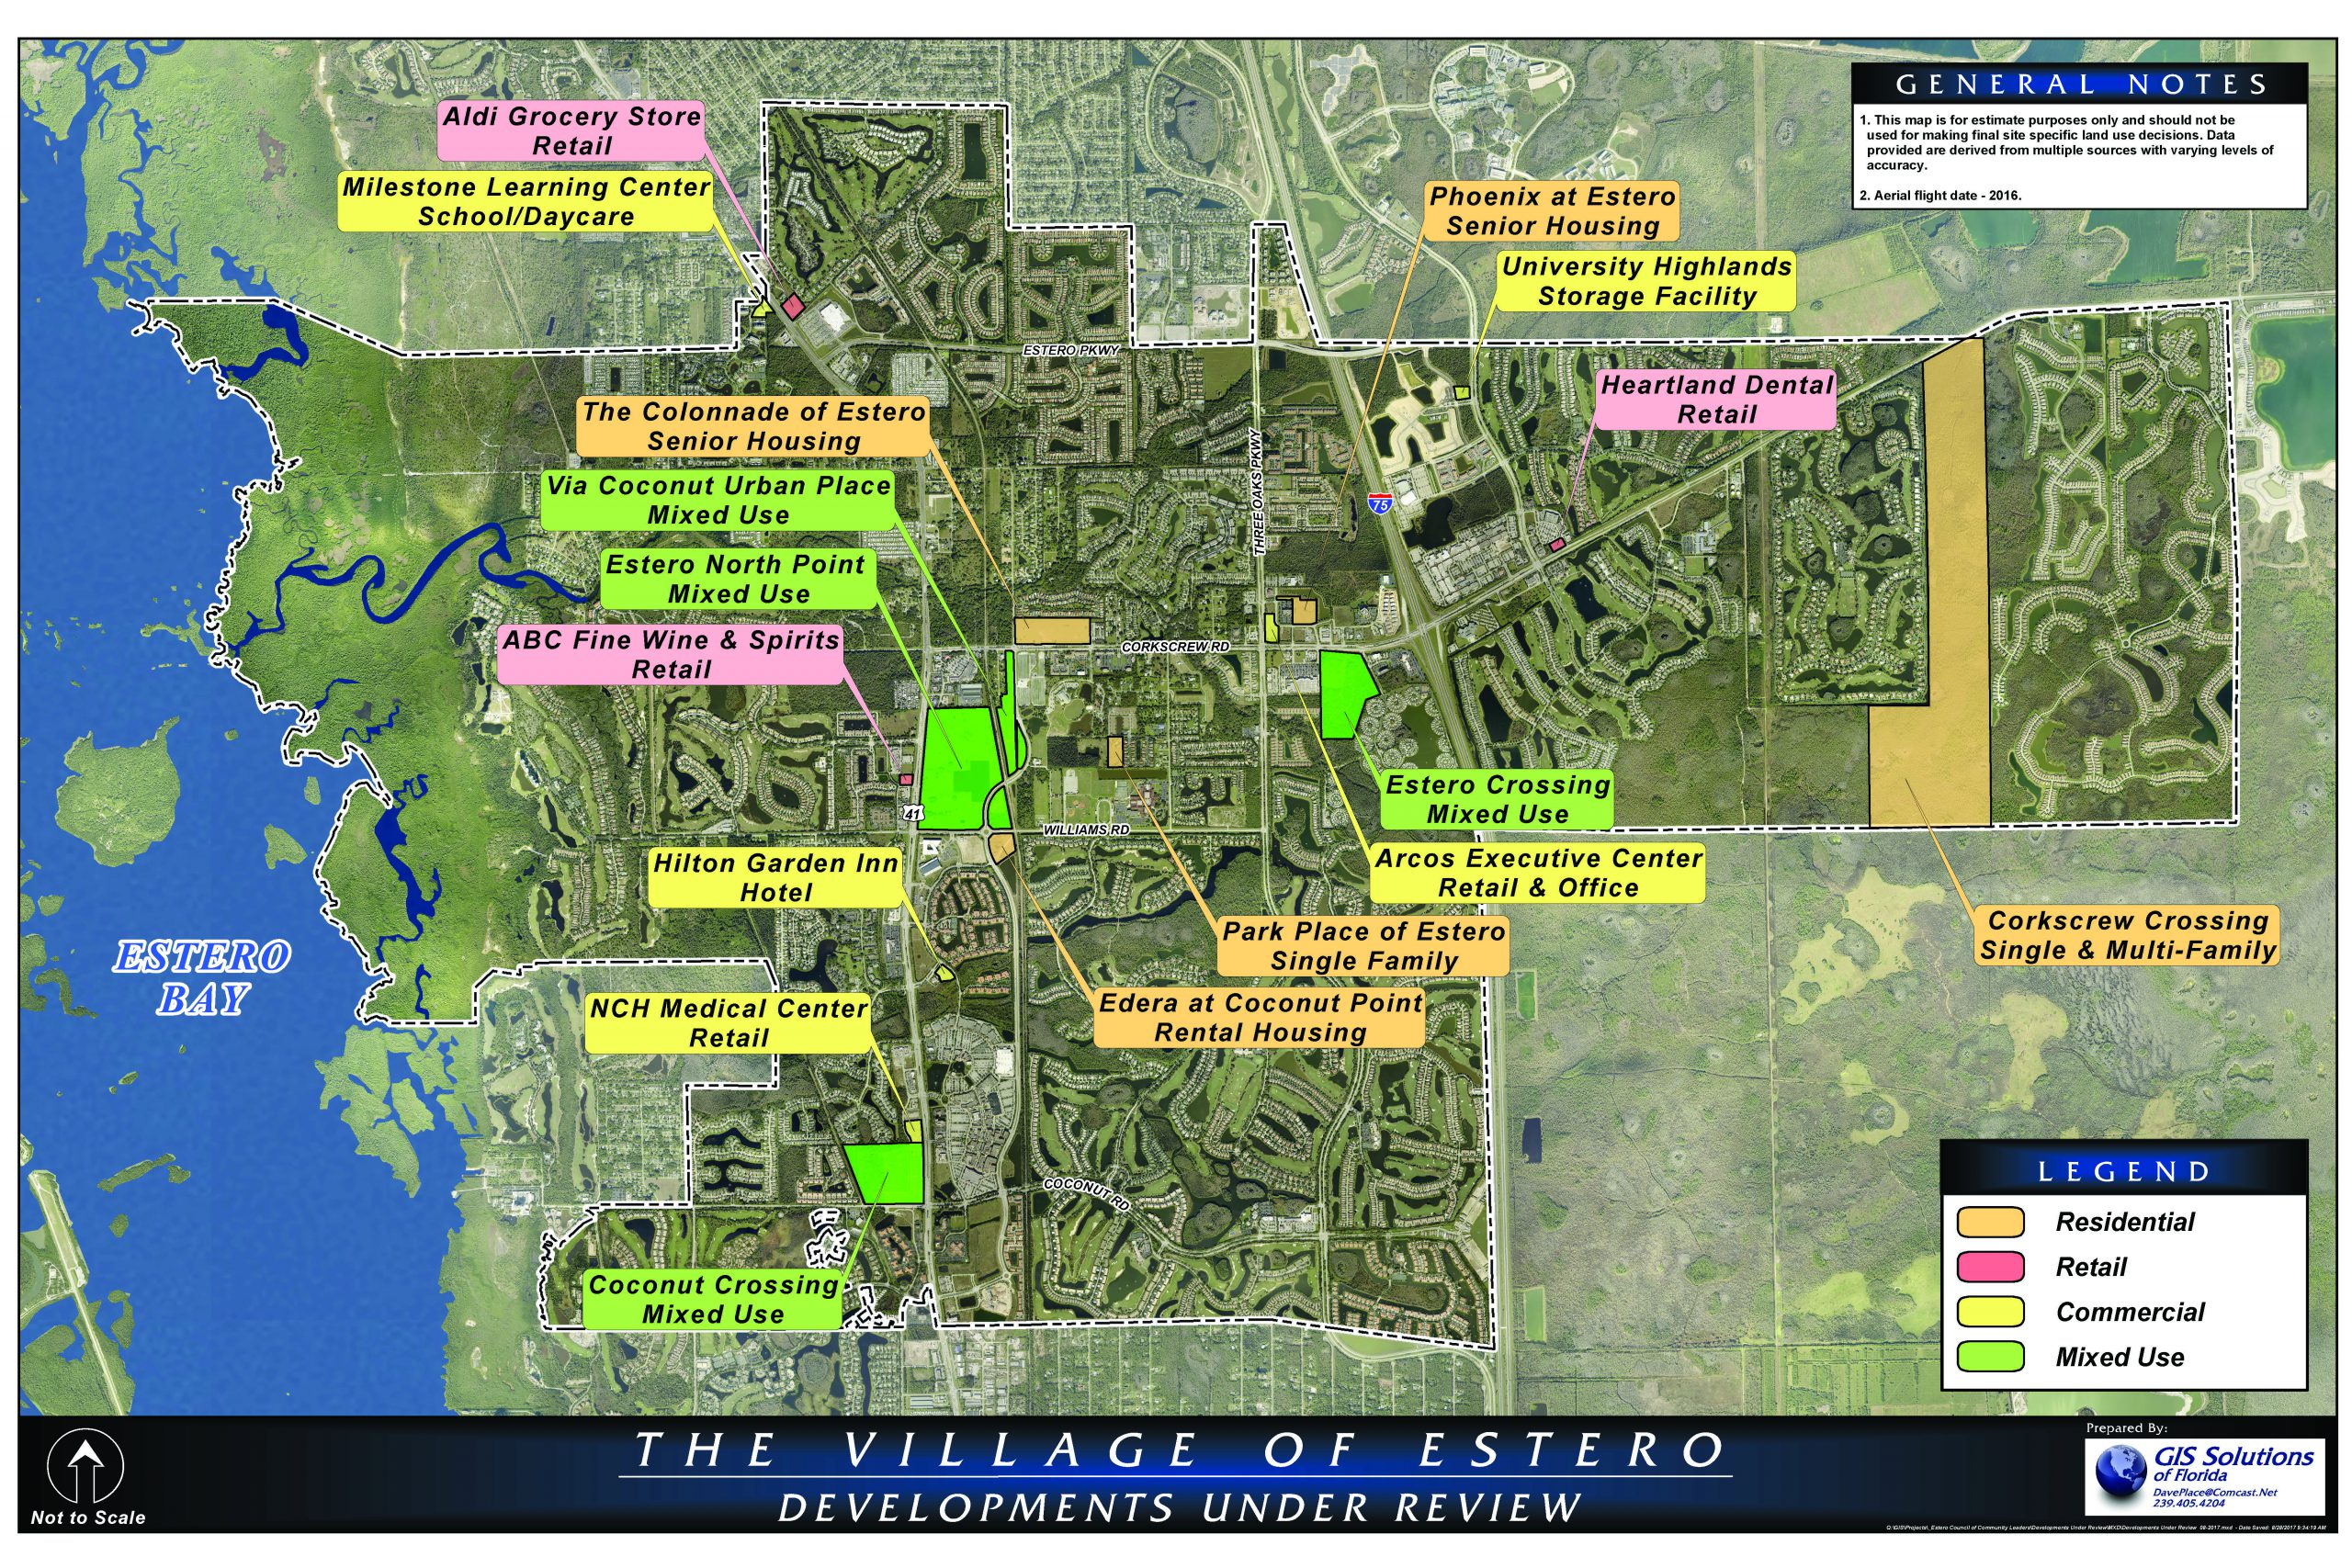 Feature: Developments Currently Under Review by the Village of Estero